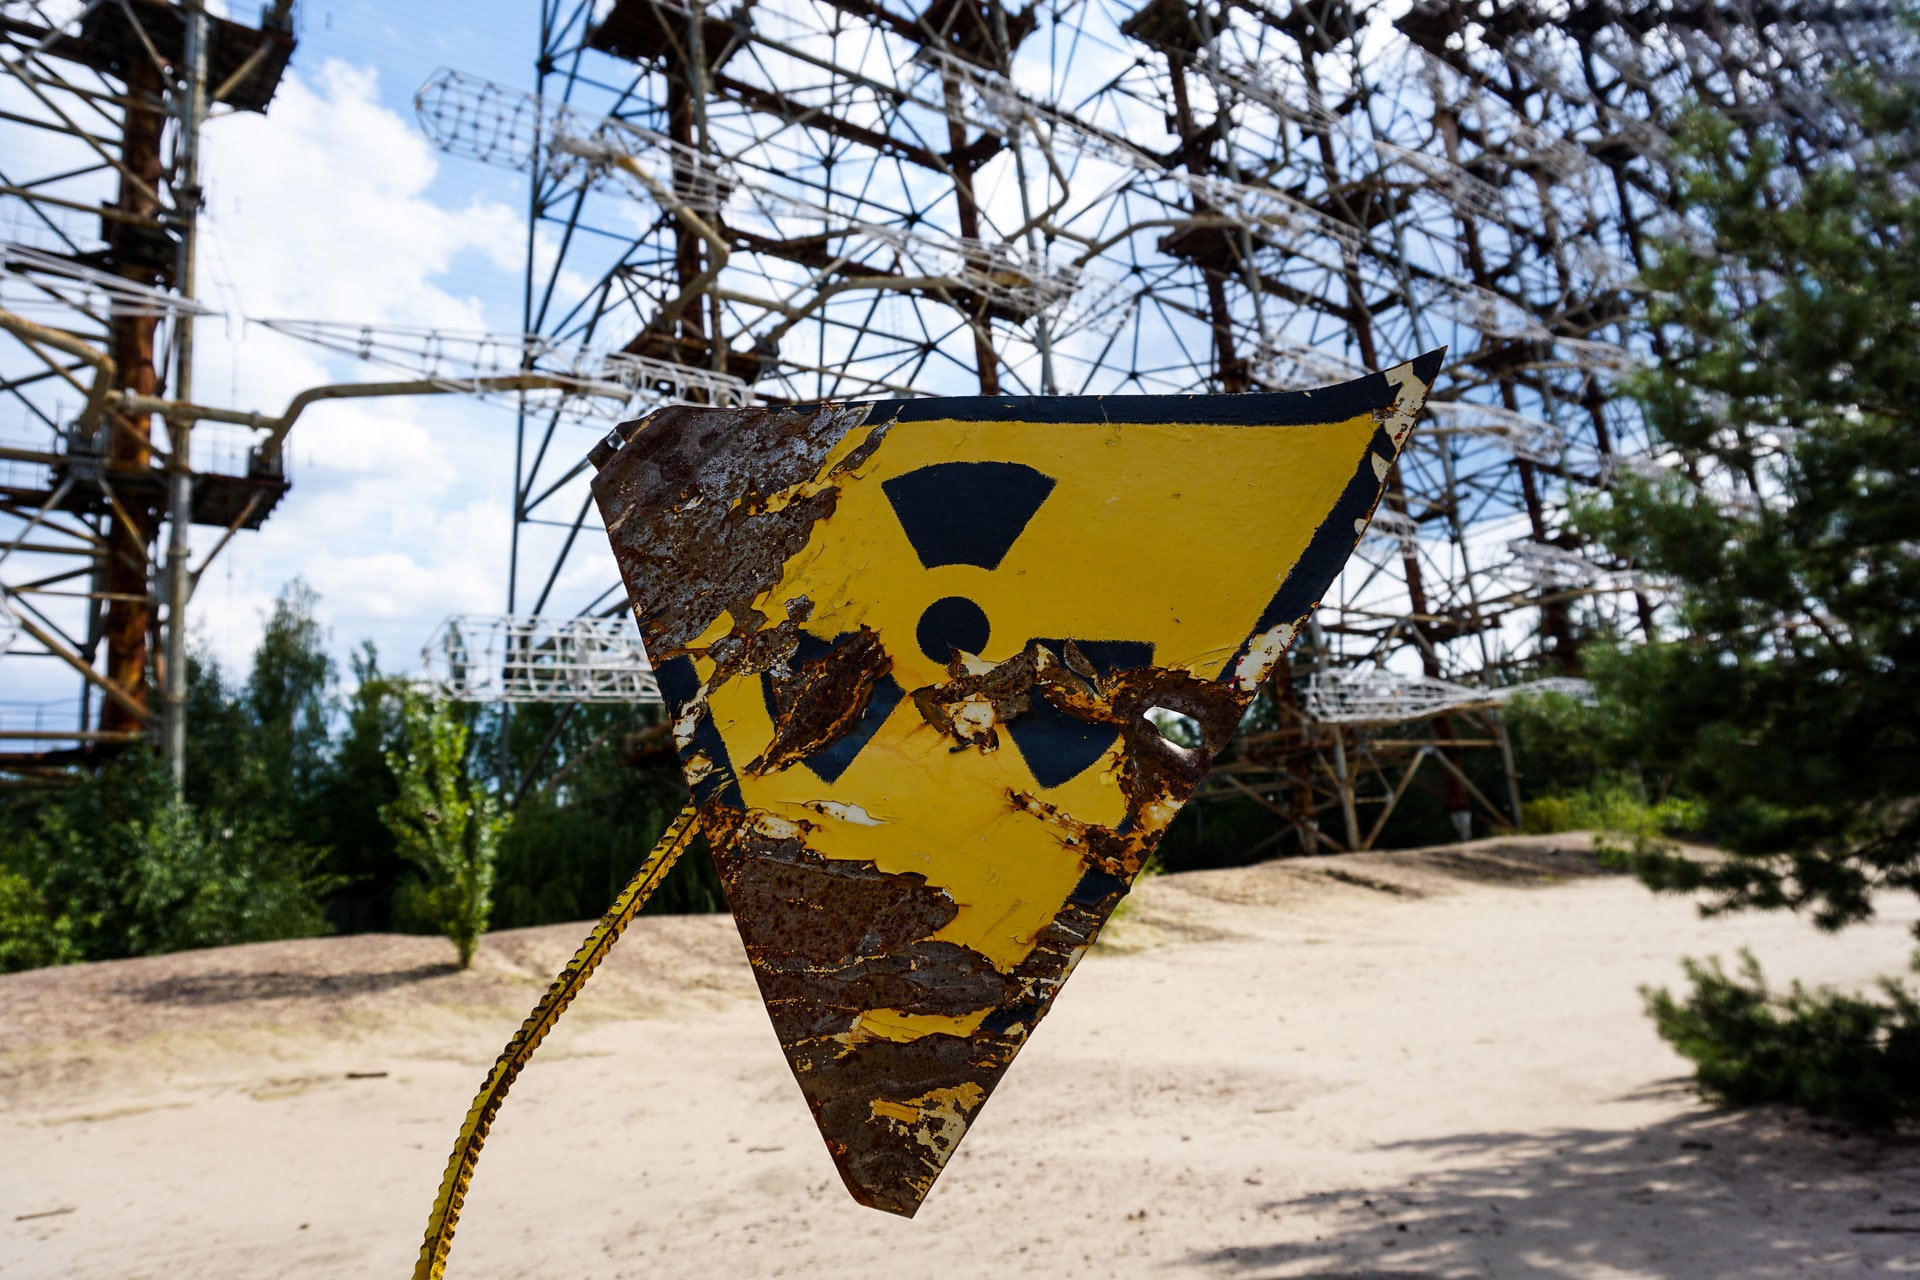 Europe’s Largest Nuclear Power Plant Enveloped by War, Yet Risk of “Explosion” Remains Limited